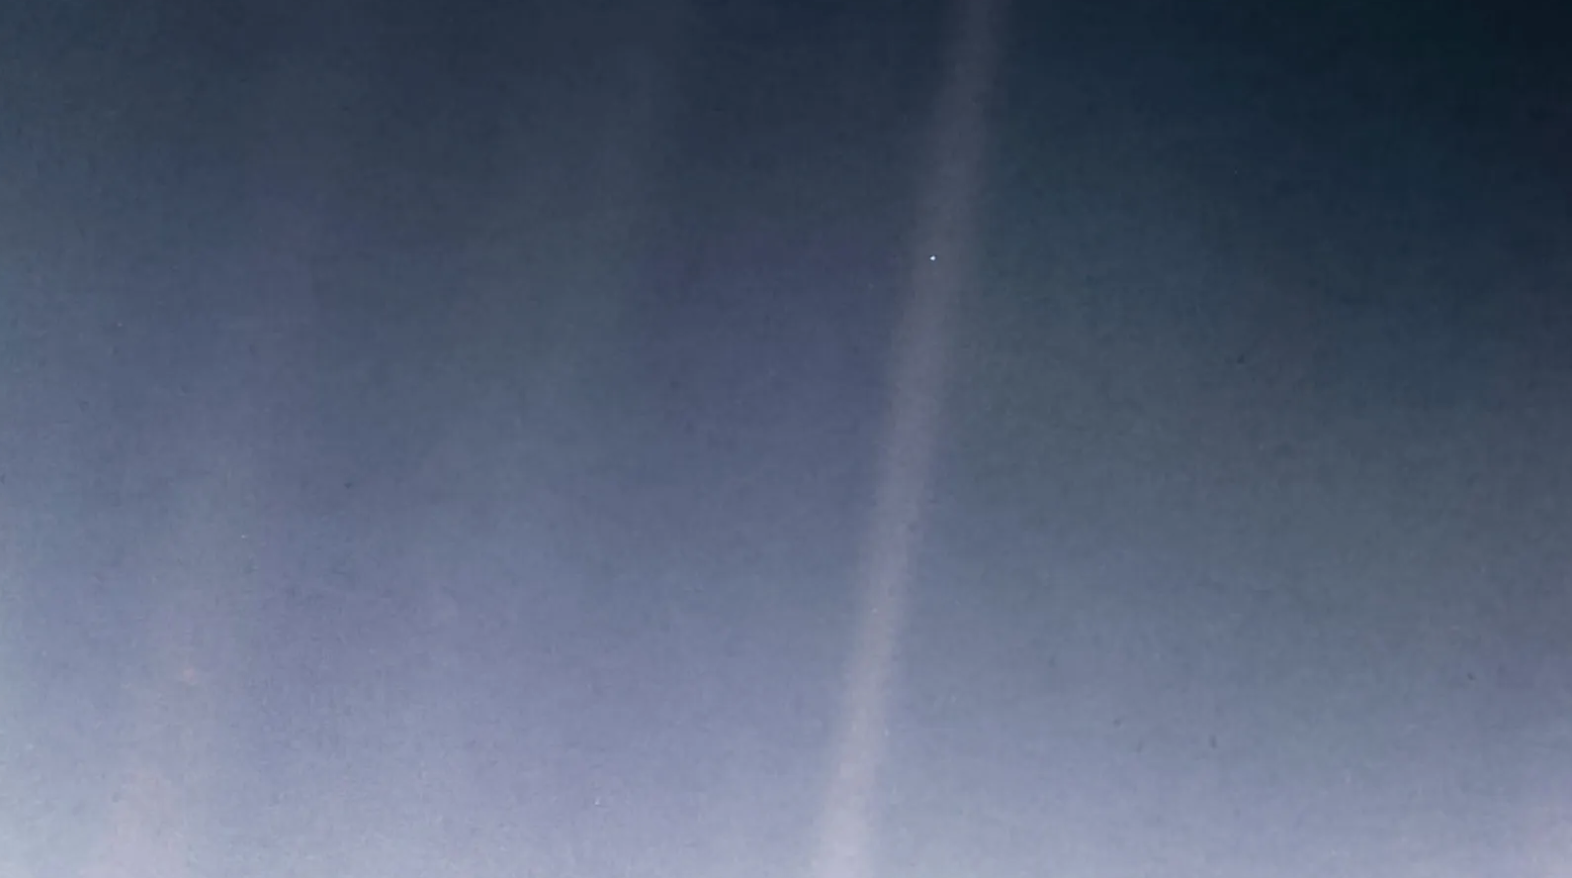 An image from Voyager. Carl Sagan's famous Pale Blue Dot.